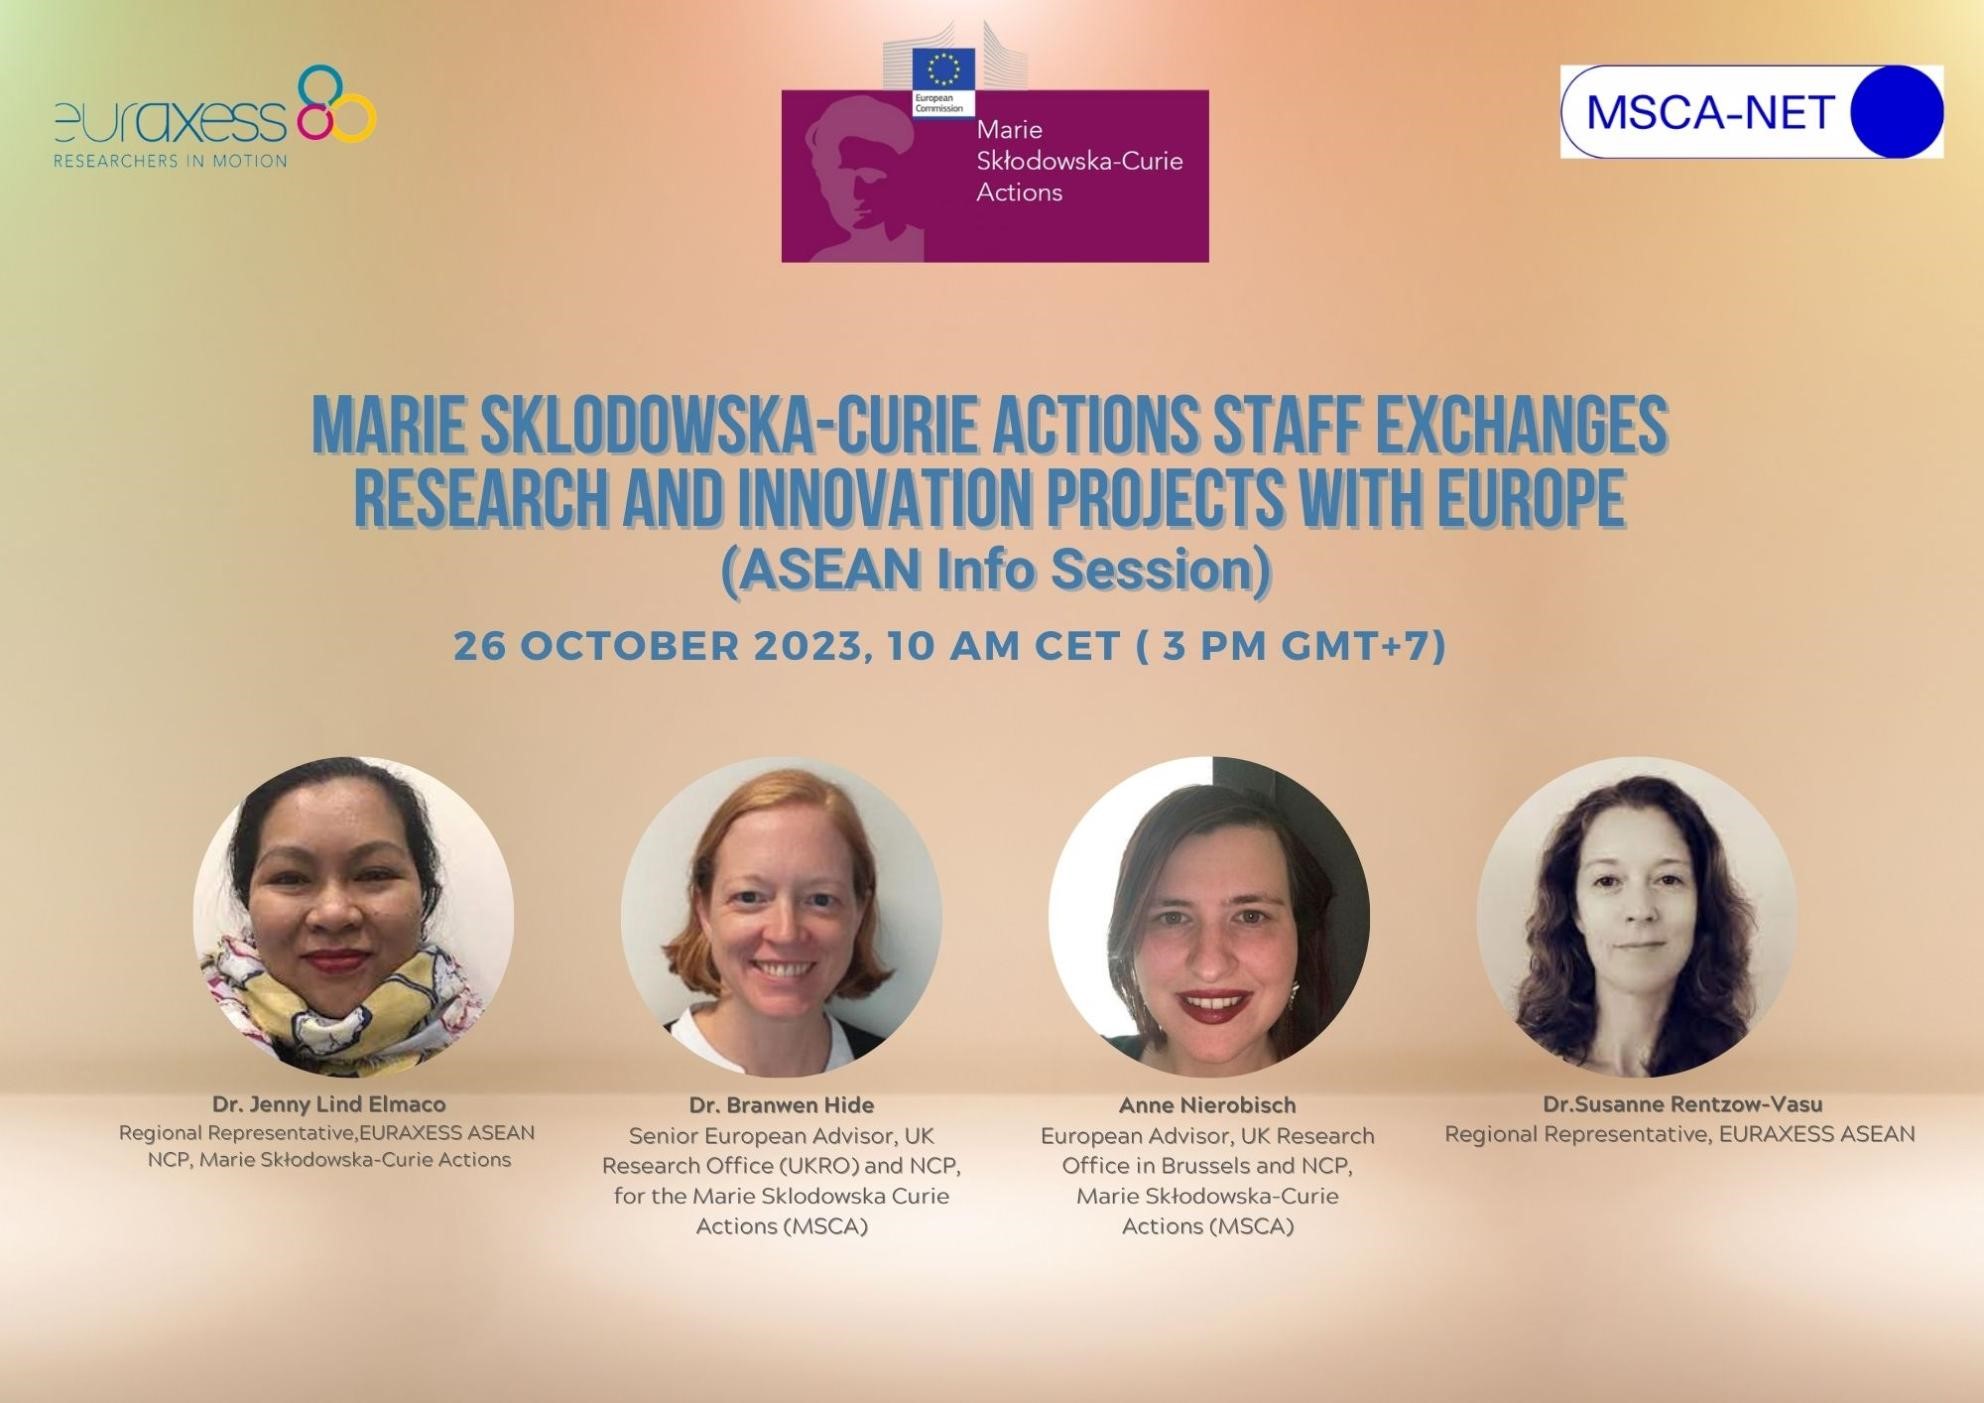 MSCA Staff Exchanges- Research & Innovation Projects with Europe ASEAN edition